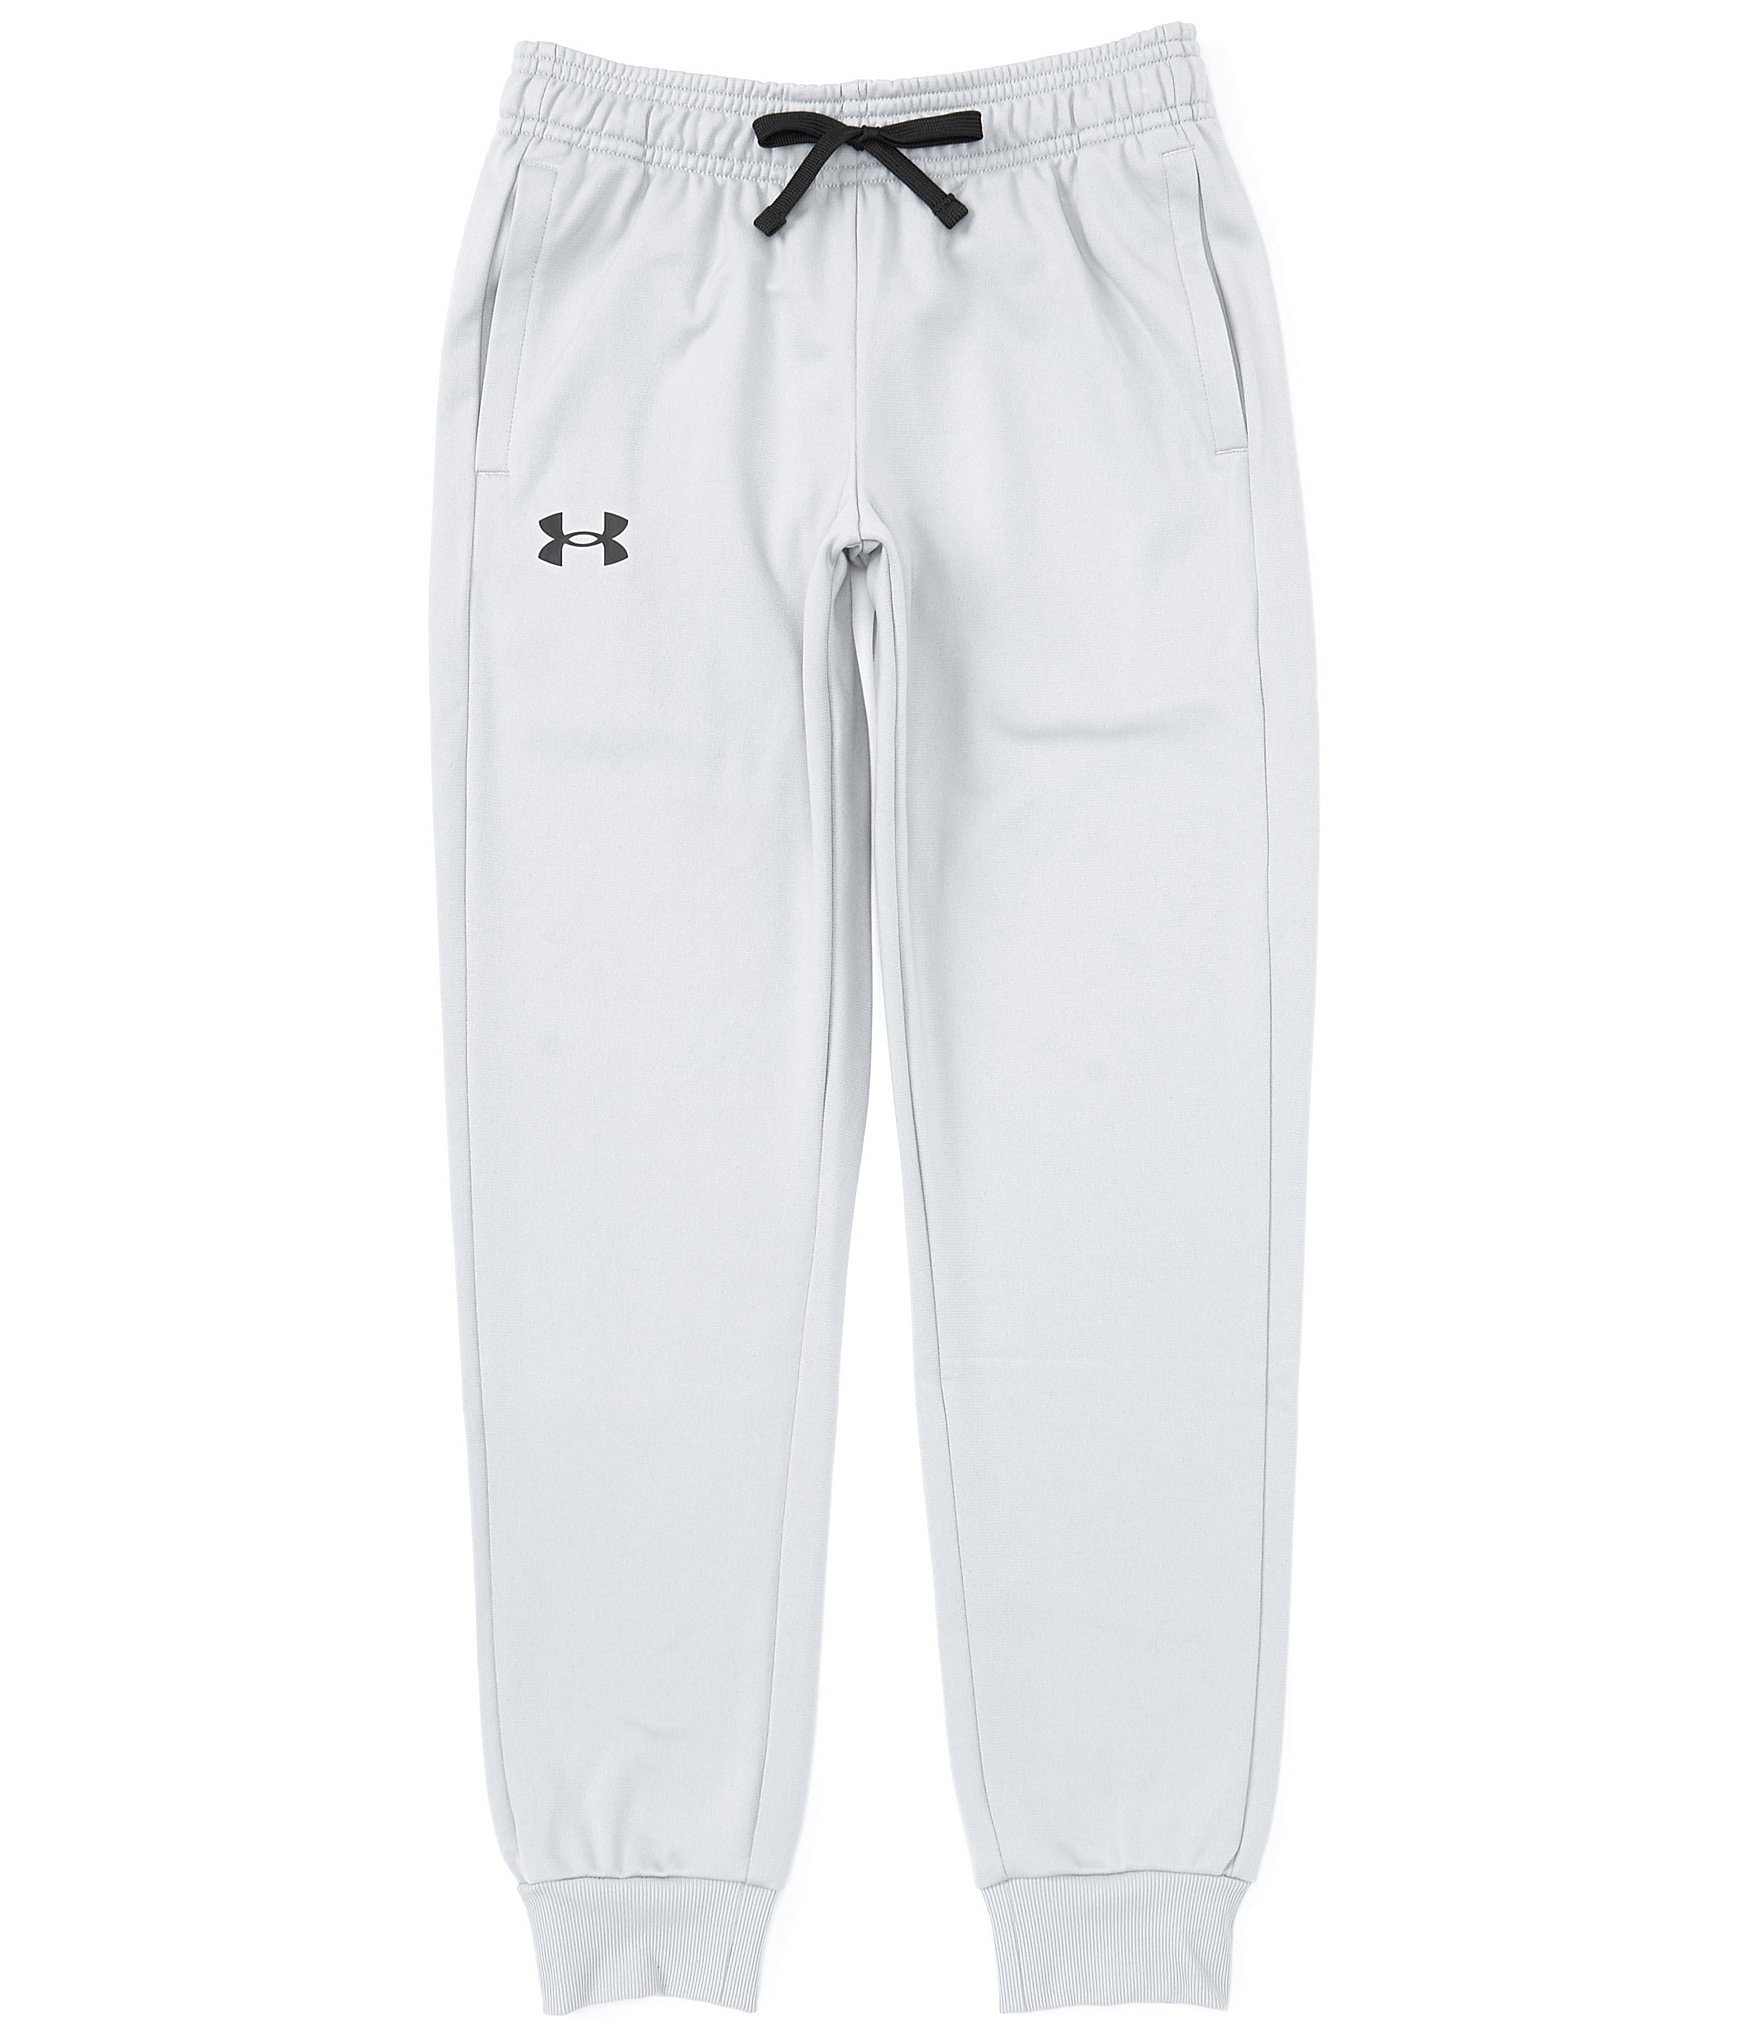 Under Armour Brawler 2.0 Warm-Up Pants for Kids